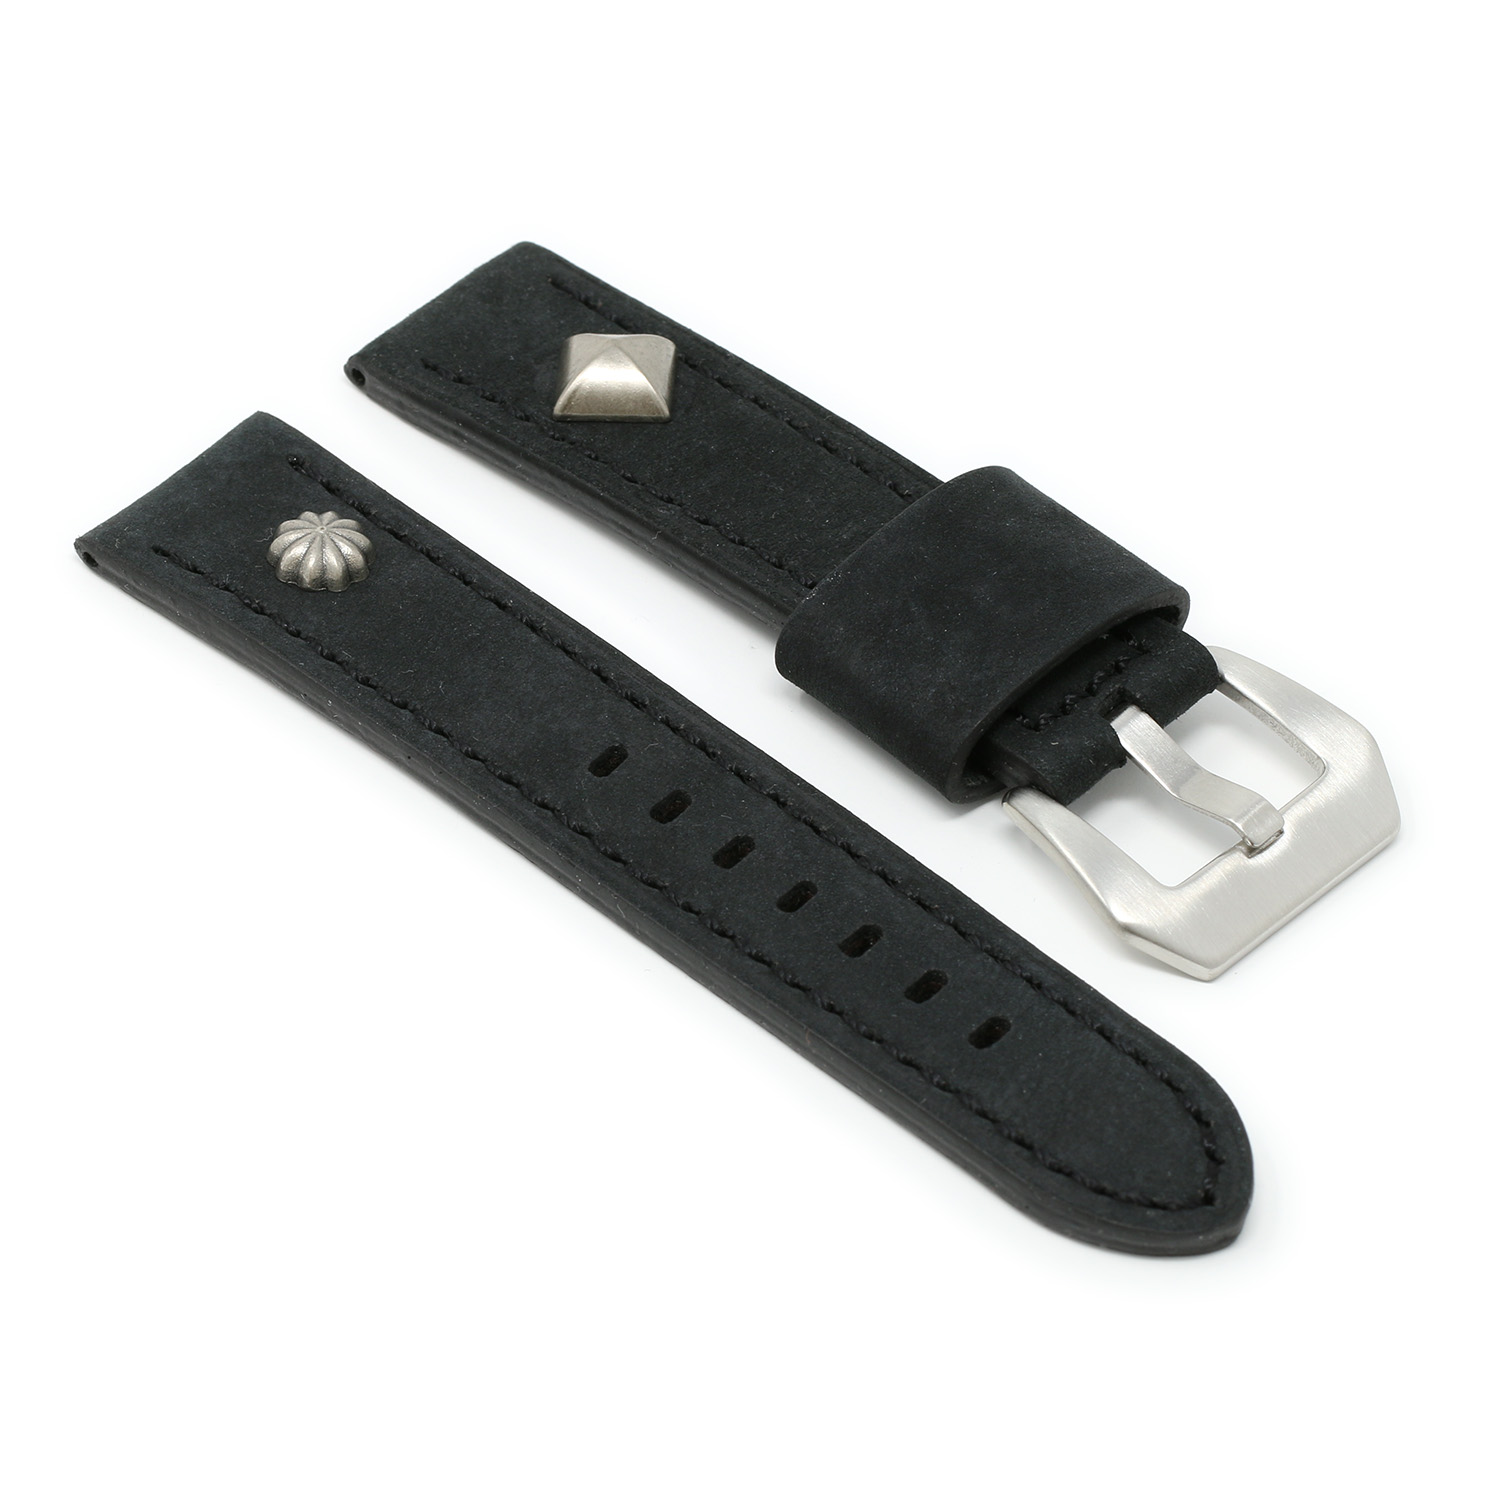 X6.1 Main Black StrapsCo Thick Vintage Leather Military Rivet Watch Band Strap 20mm 22mm 24mm